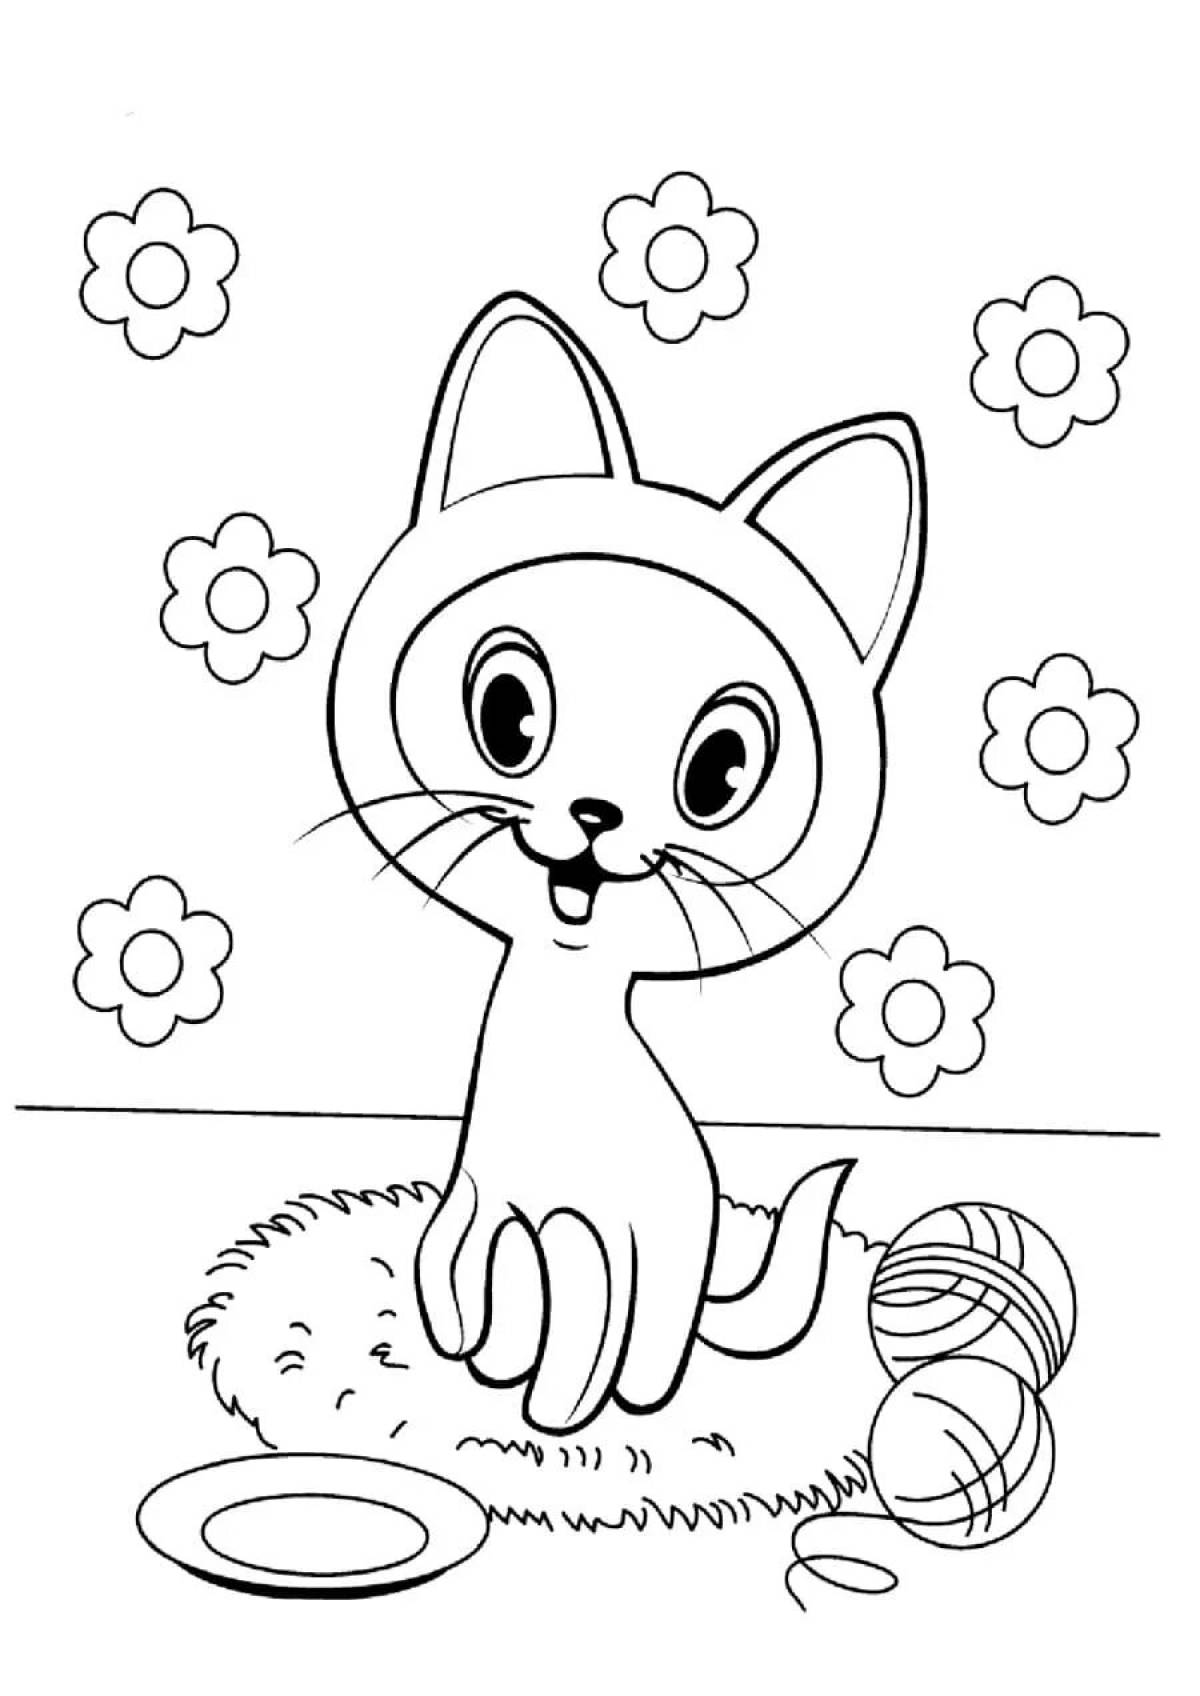 Zany kittens coloring book for children 6-7 years old